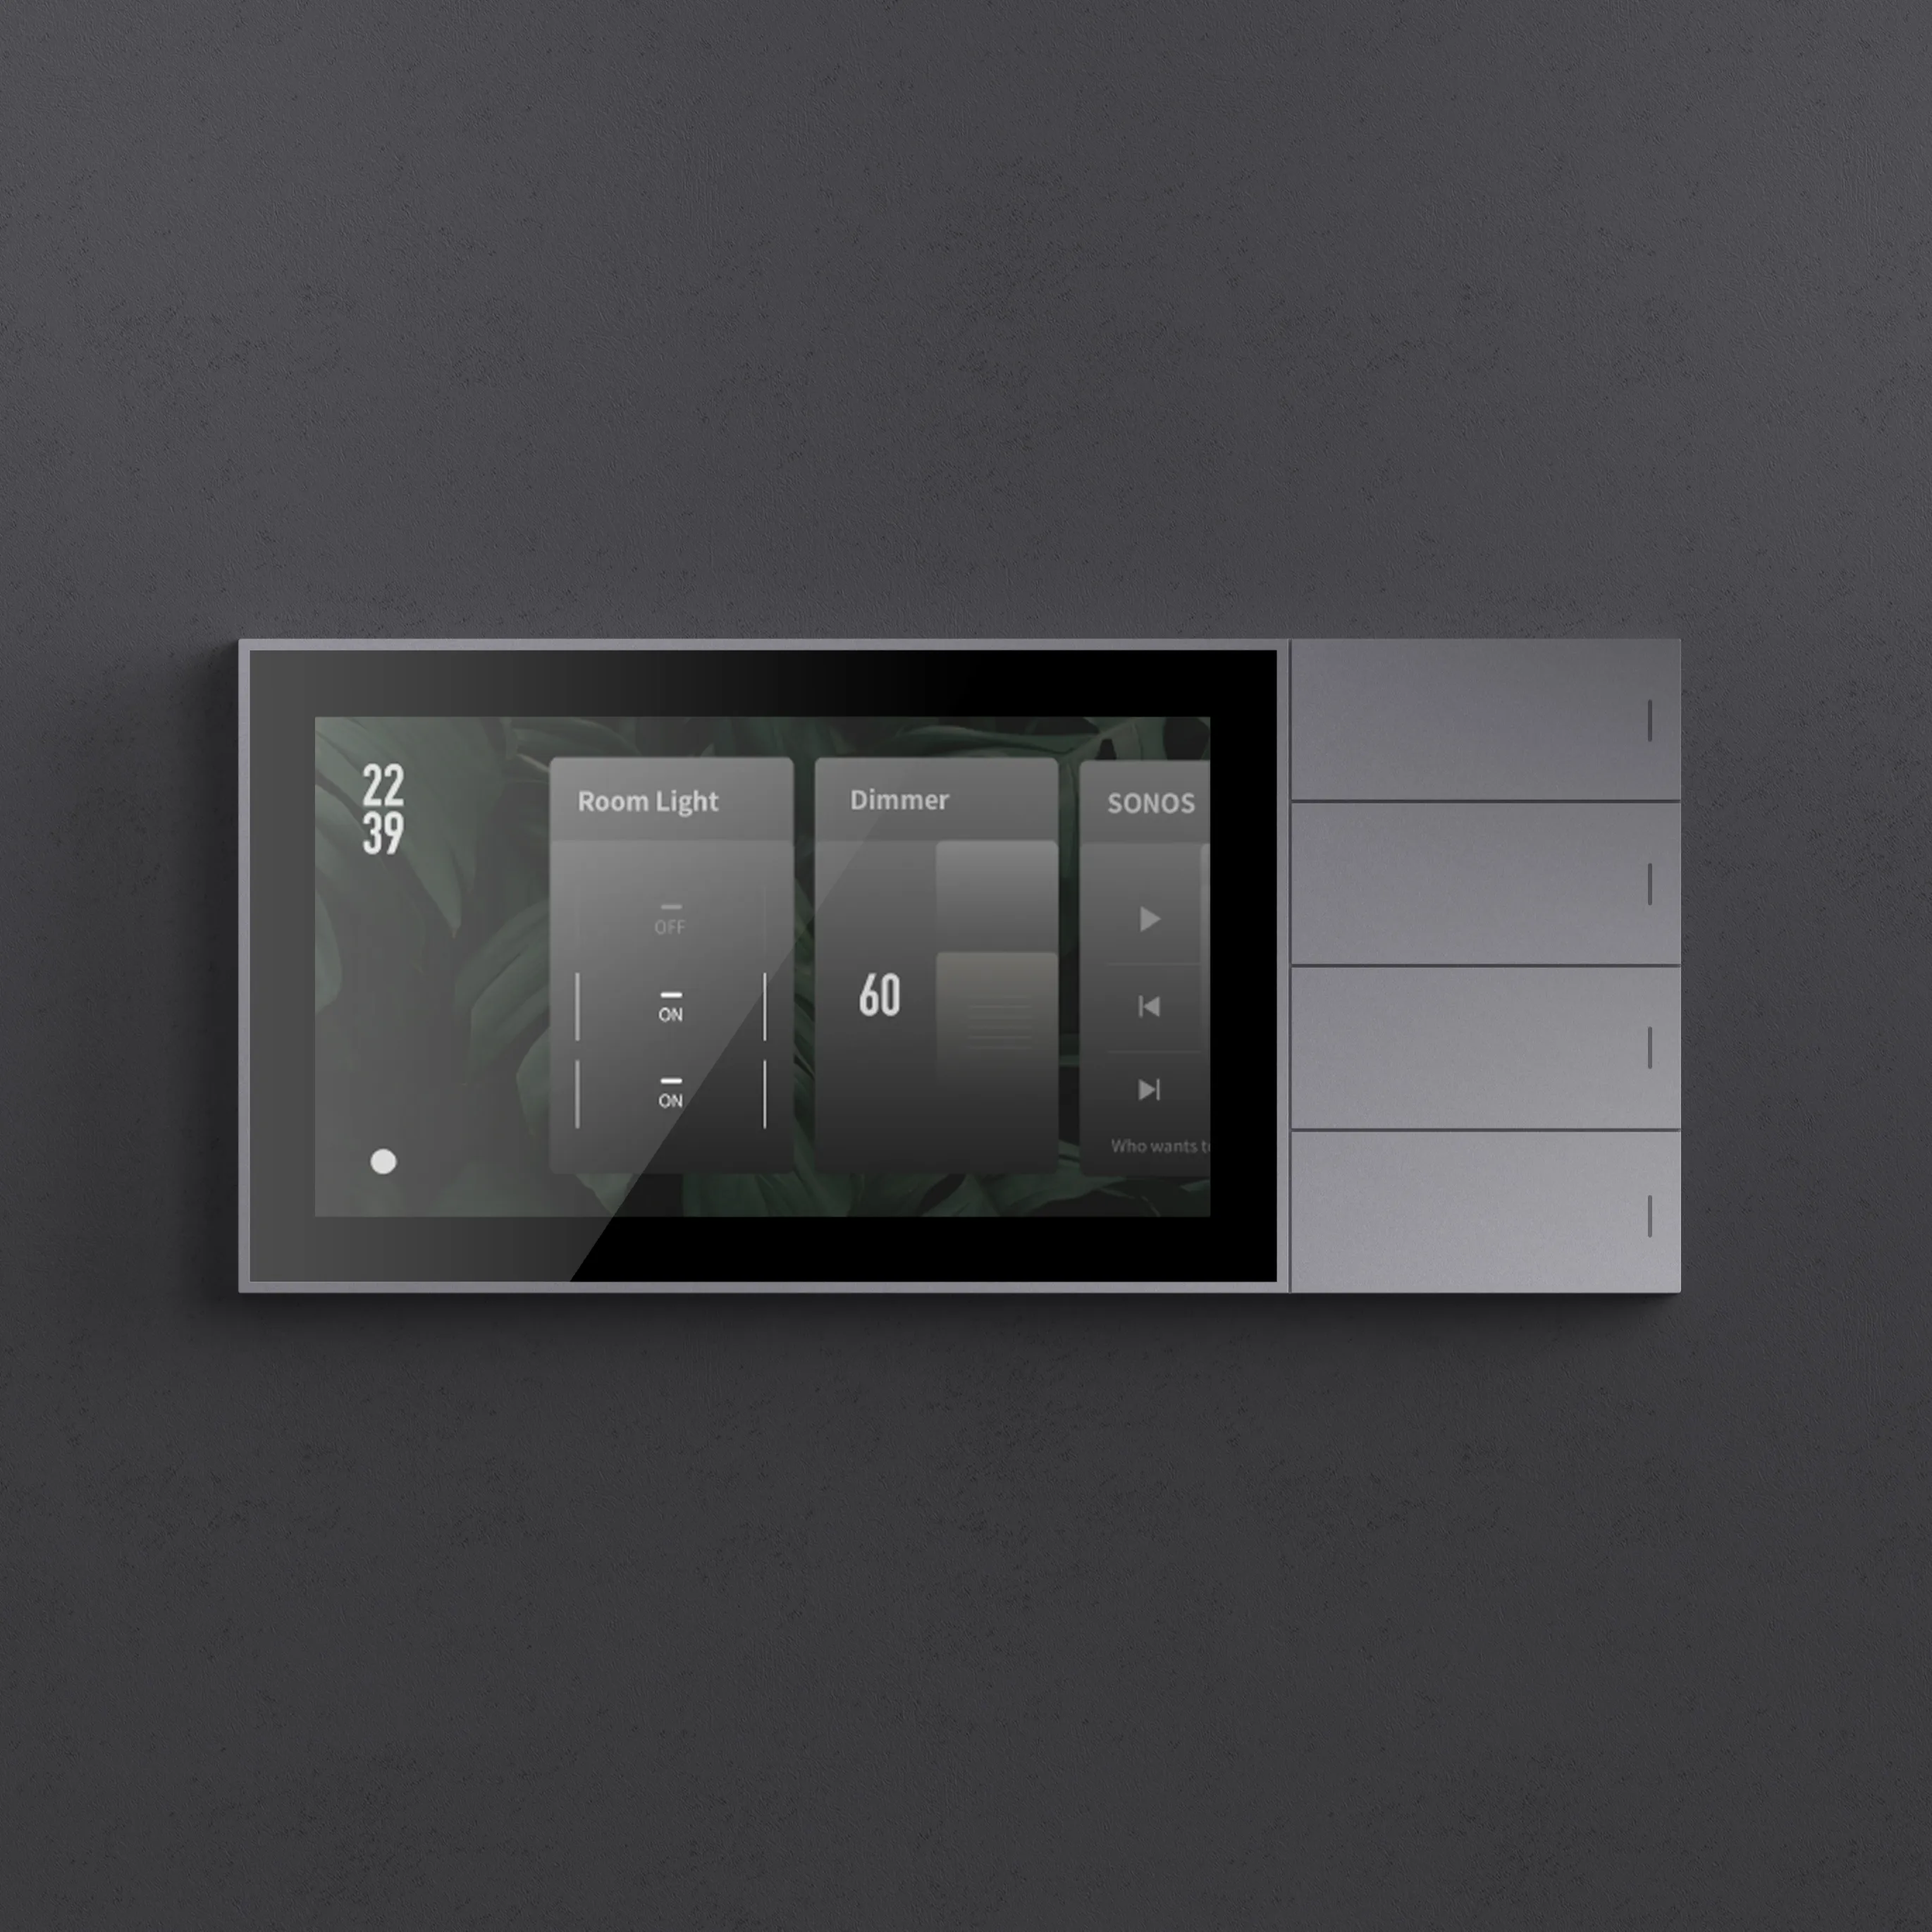 LifeSmart Smart Home AC Control Panel Light Switch Dimmer Control Automation Touch Screen Control Pad Nature 7 pro